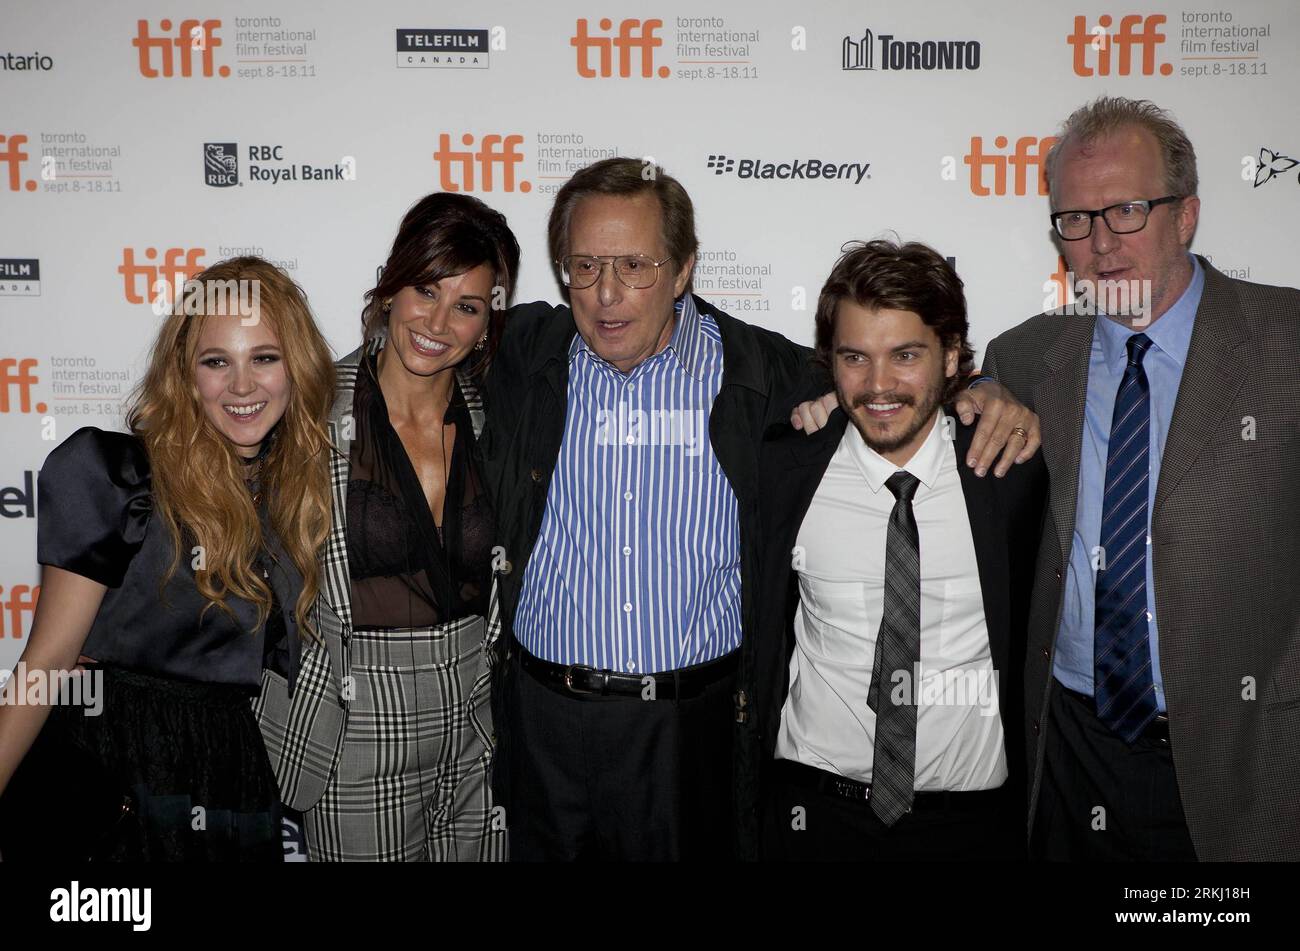 Bildnummer: 55941771  Datum: 11.09.2011  Copyright: imago/Xinhua (110912) -- TORONTO, Sept. 12, 2011 (Xinhua) -- Actresses Juno Temple and Gina Gershon, director William Friedkin, actor Emile Hirsch and screenwriter Tracy Letts (L to R) pose for photos before the screening of Killer Joe at Ryerson Theater during the 36th Toronto International Film Festival in Toronto, Canada, Sept.11, 2011. (Xinhua/Zou Zheng)(axy) CANADA-TORONTO INTERNATIONAL FILM FESTIVAL- KILLER JOE PUBLICATIONxNOTxINxCHN People Film Filmfestival x0x xtm premiumd 2011 quer      55941771 Date 11 09 2011 Copyright Imago XINHUA Stock Photo